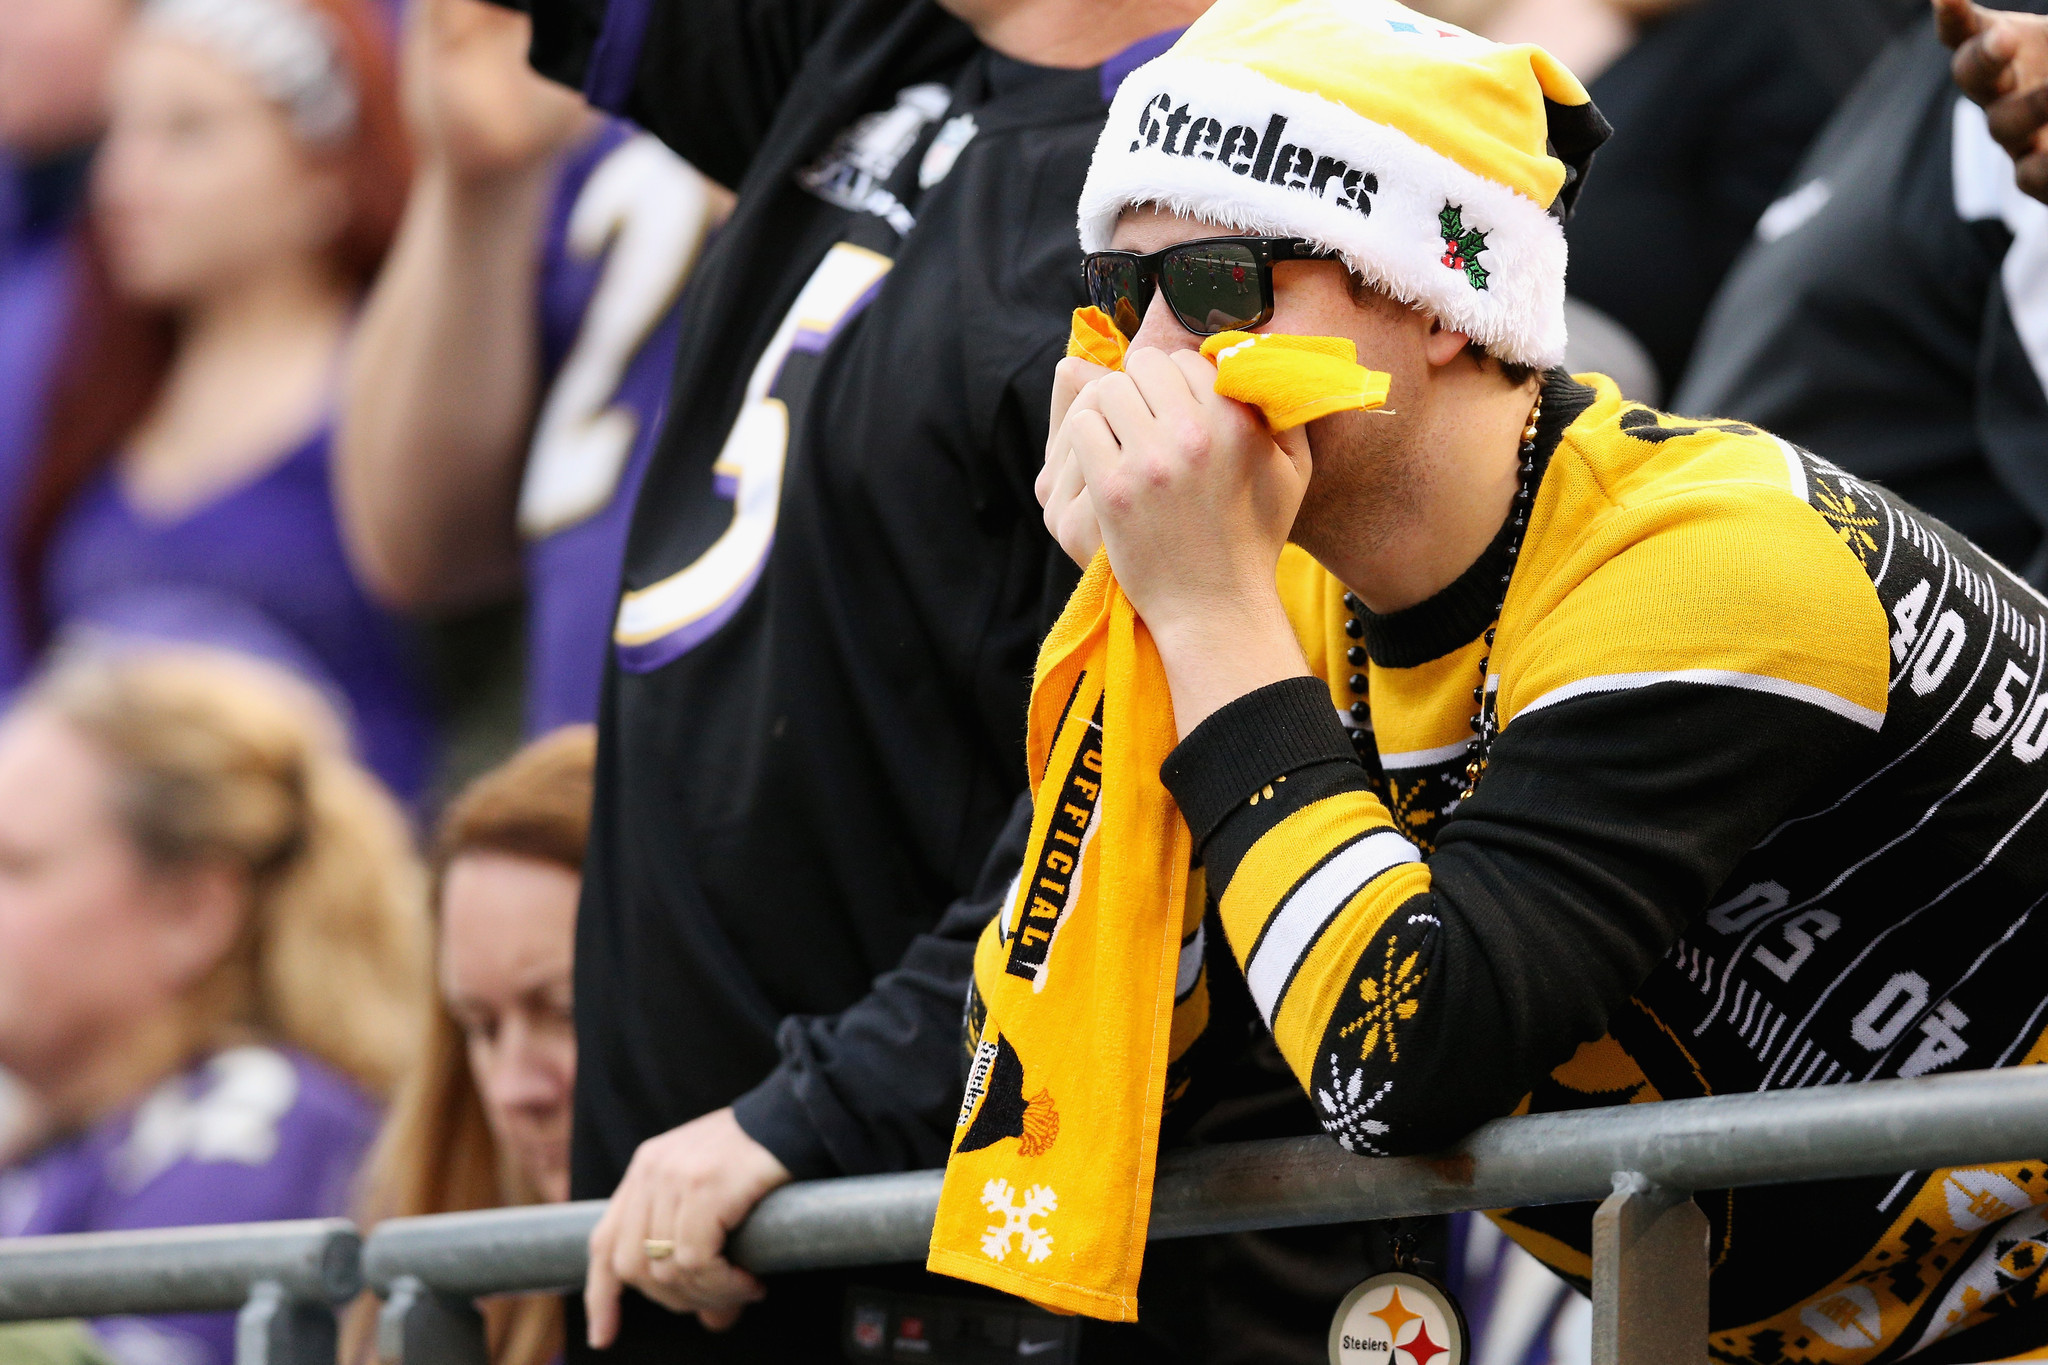 Cryin' in their towels: Memorable Steelers losses - Baltimore Sun2048 x 1365